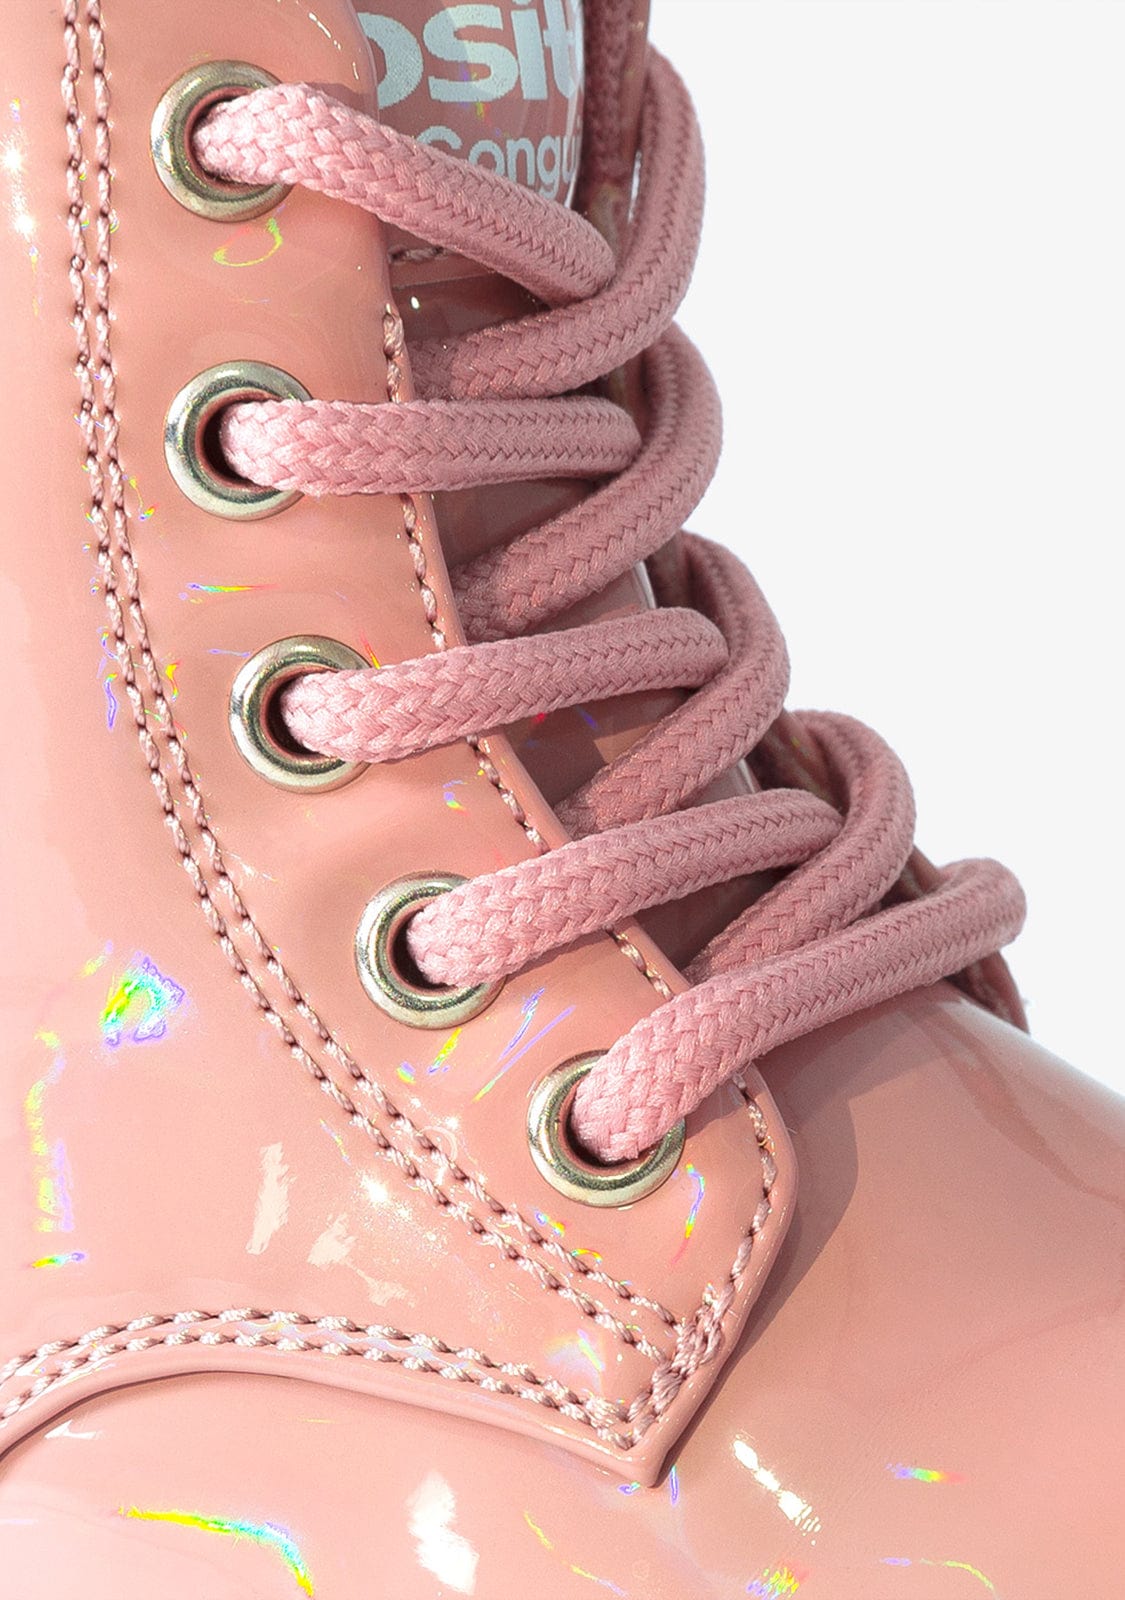 OSITO Shoes Baby's Pink Iridescent Combat Boots